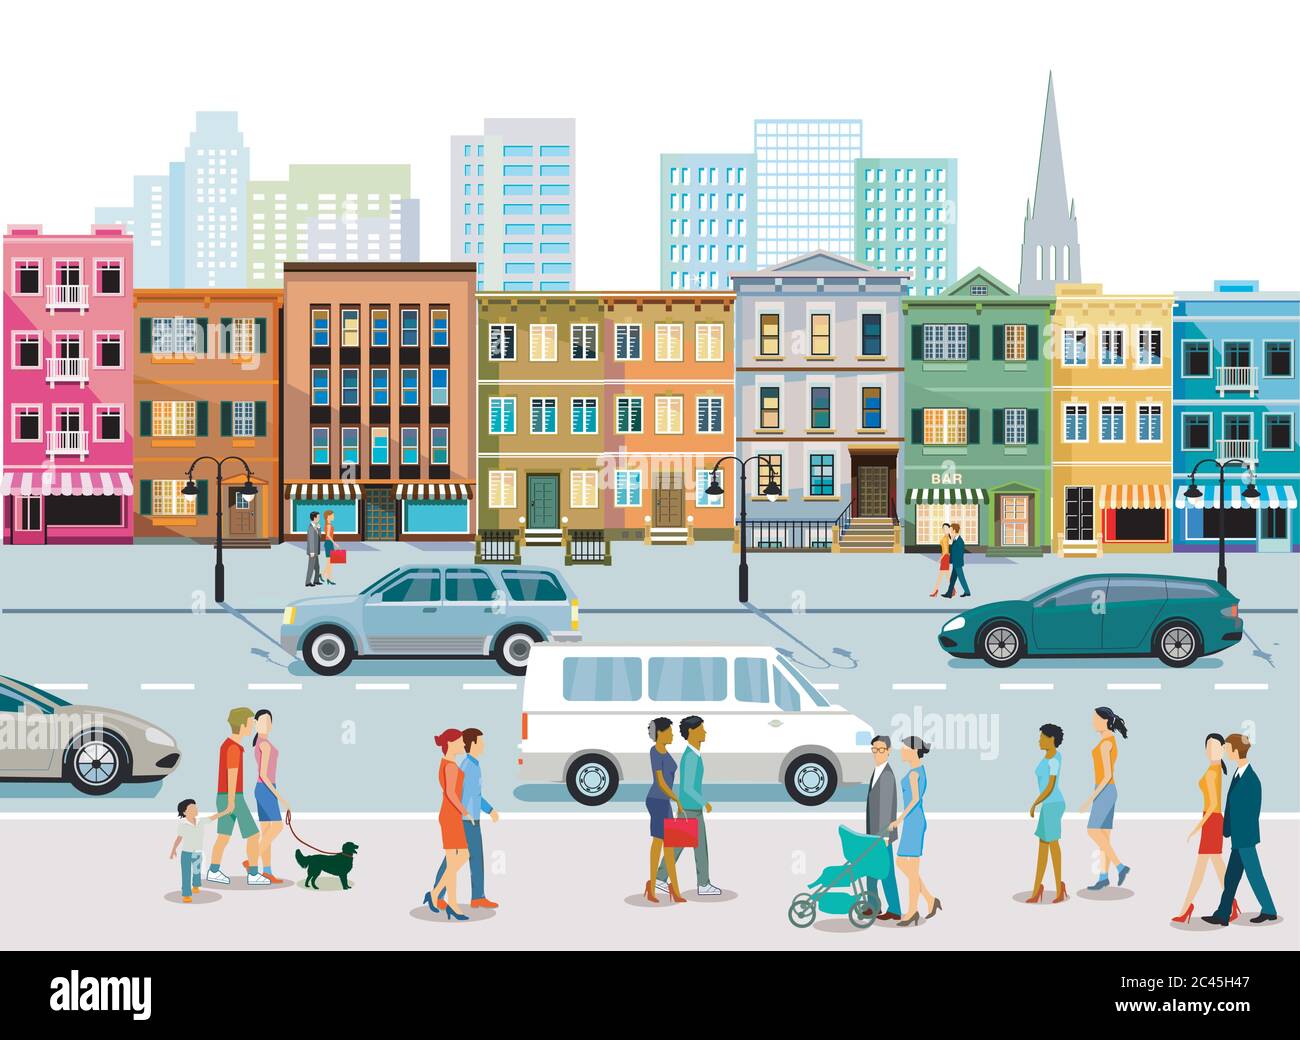 City with traffic, apartment buildings and pedestrians on the sidewalk Stock Vector